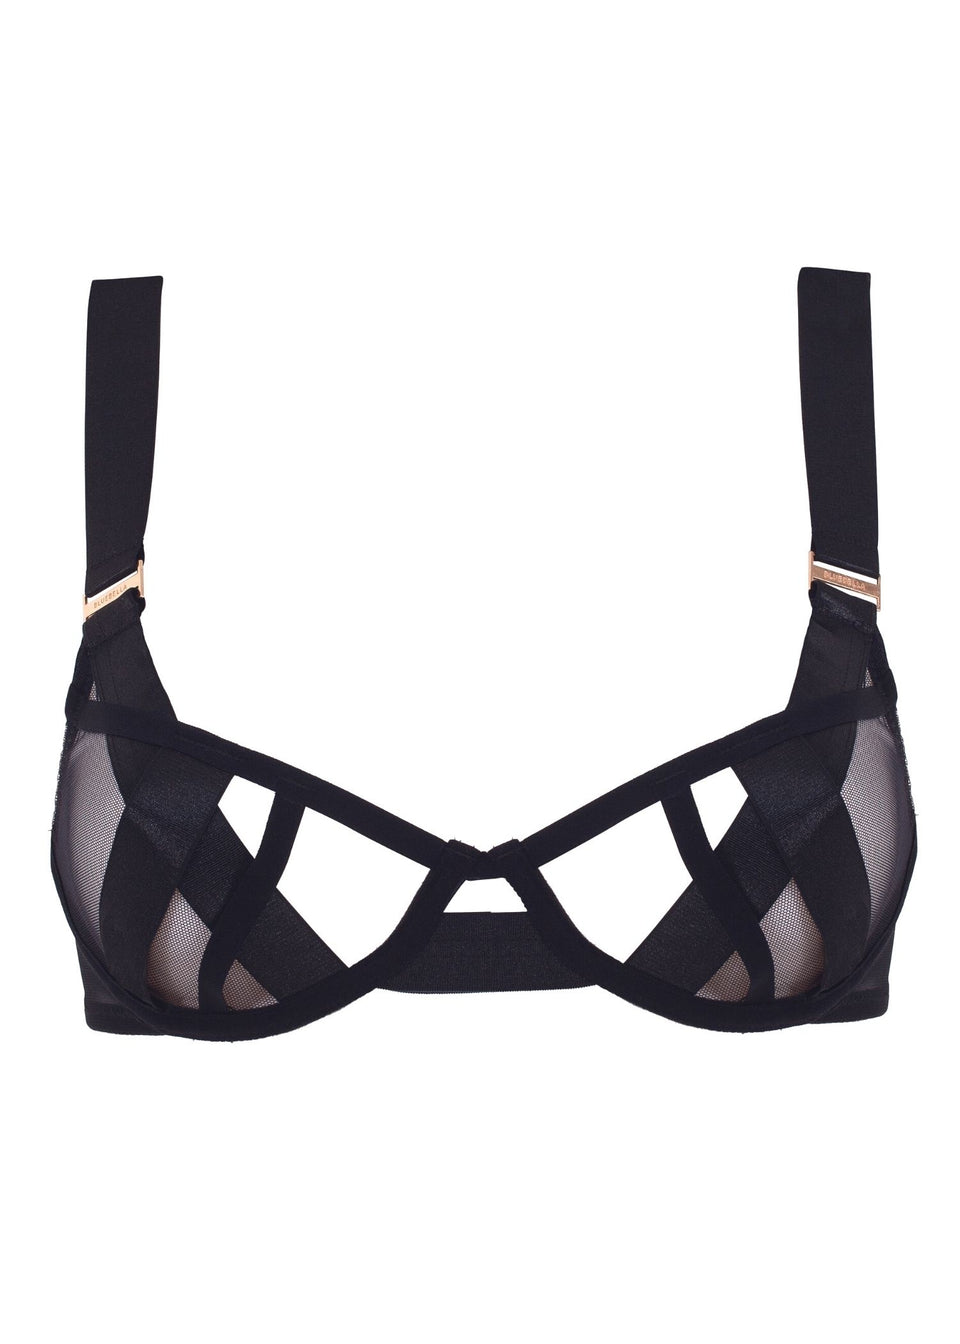 Best Selling Lingerie, Luxury Bras and Panties | Official Avec Amour ...